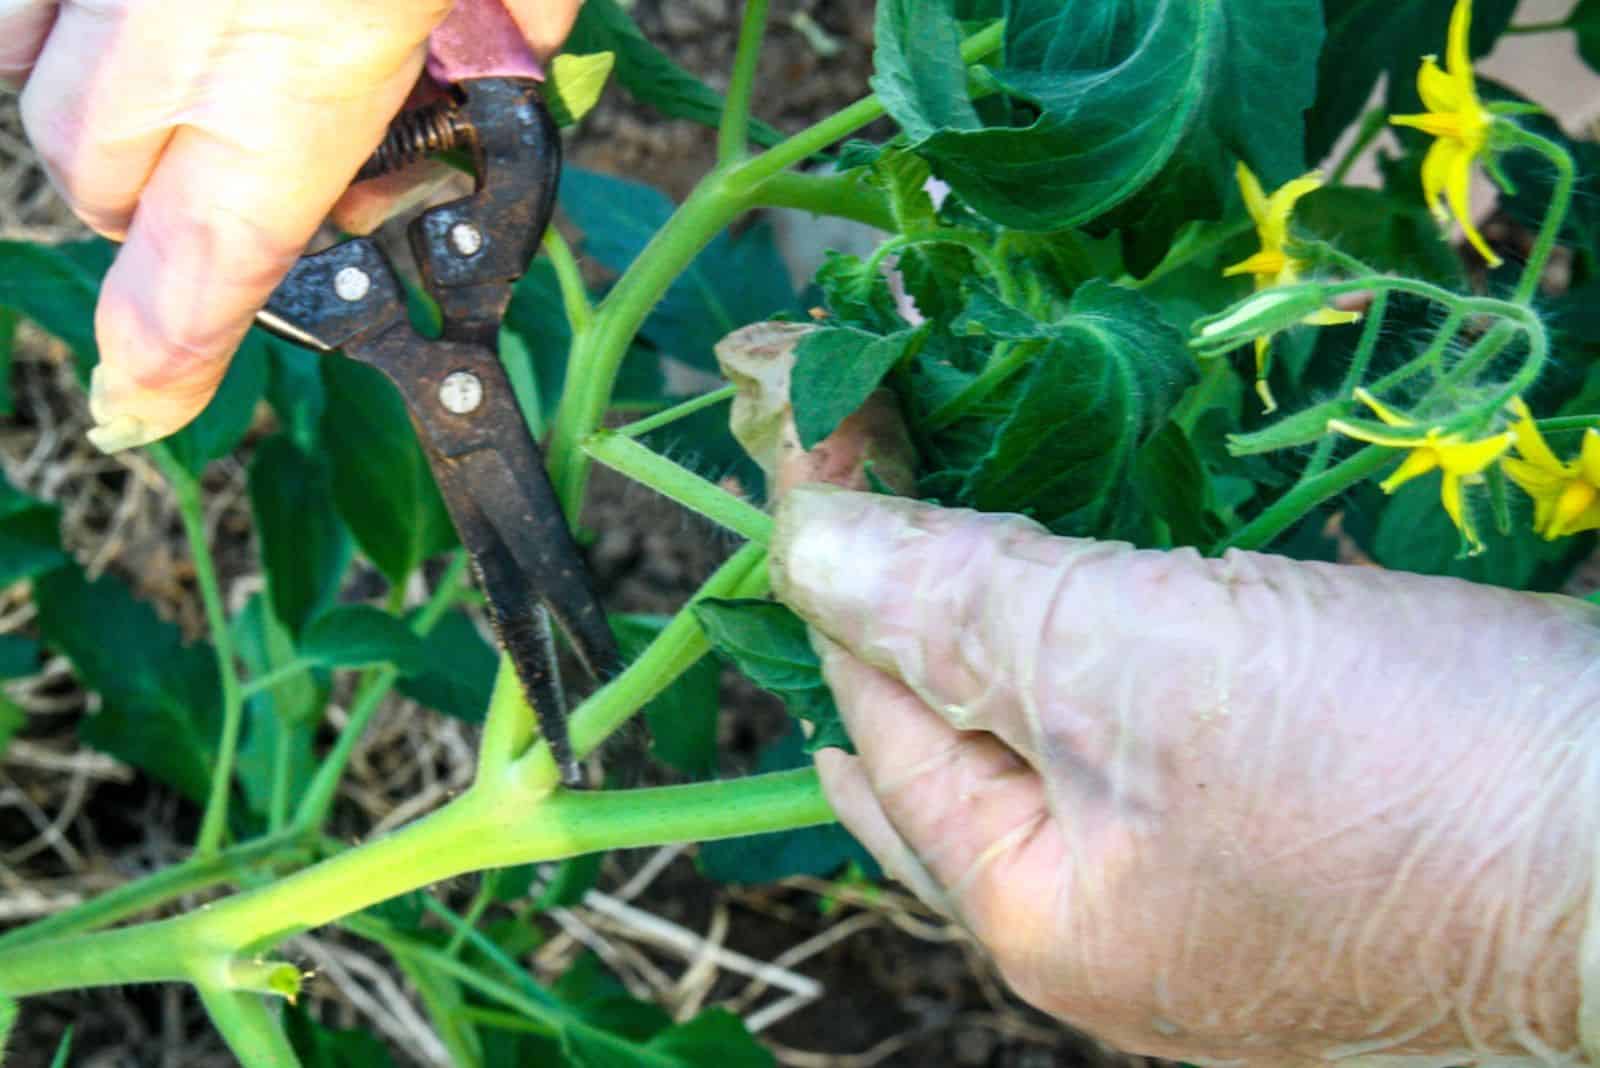 pruning of laterals from the tomato bushes